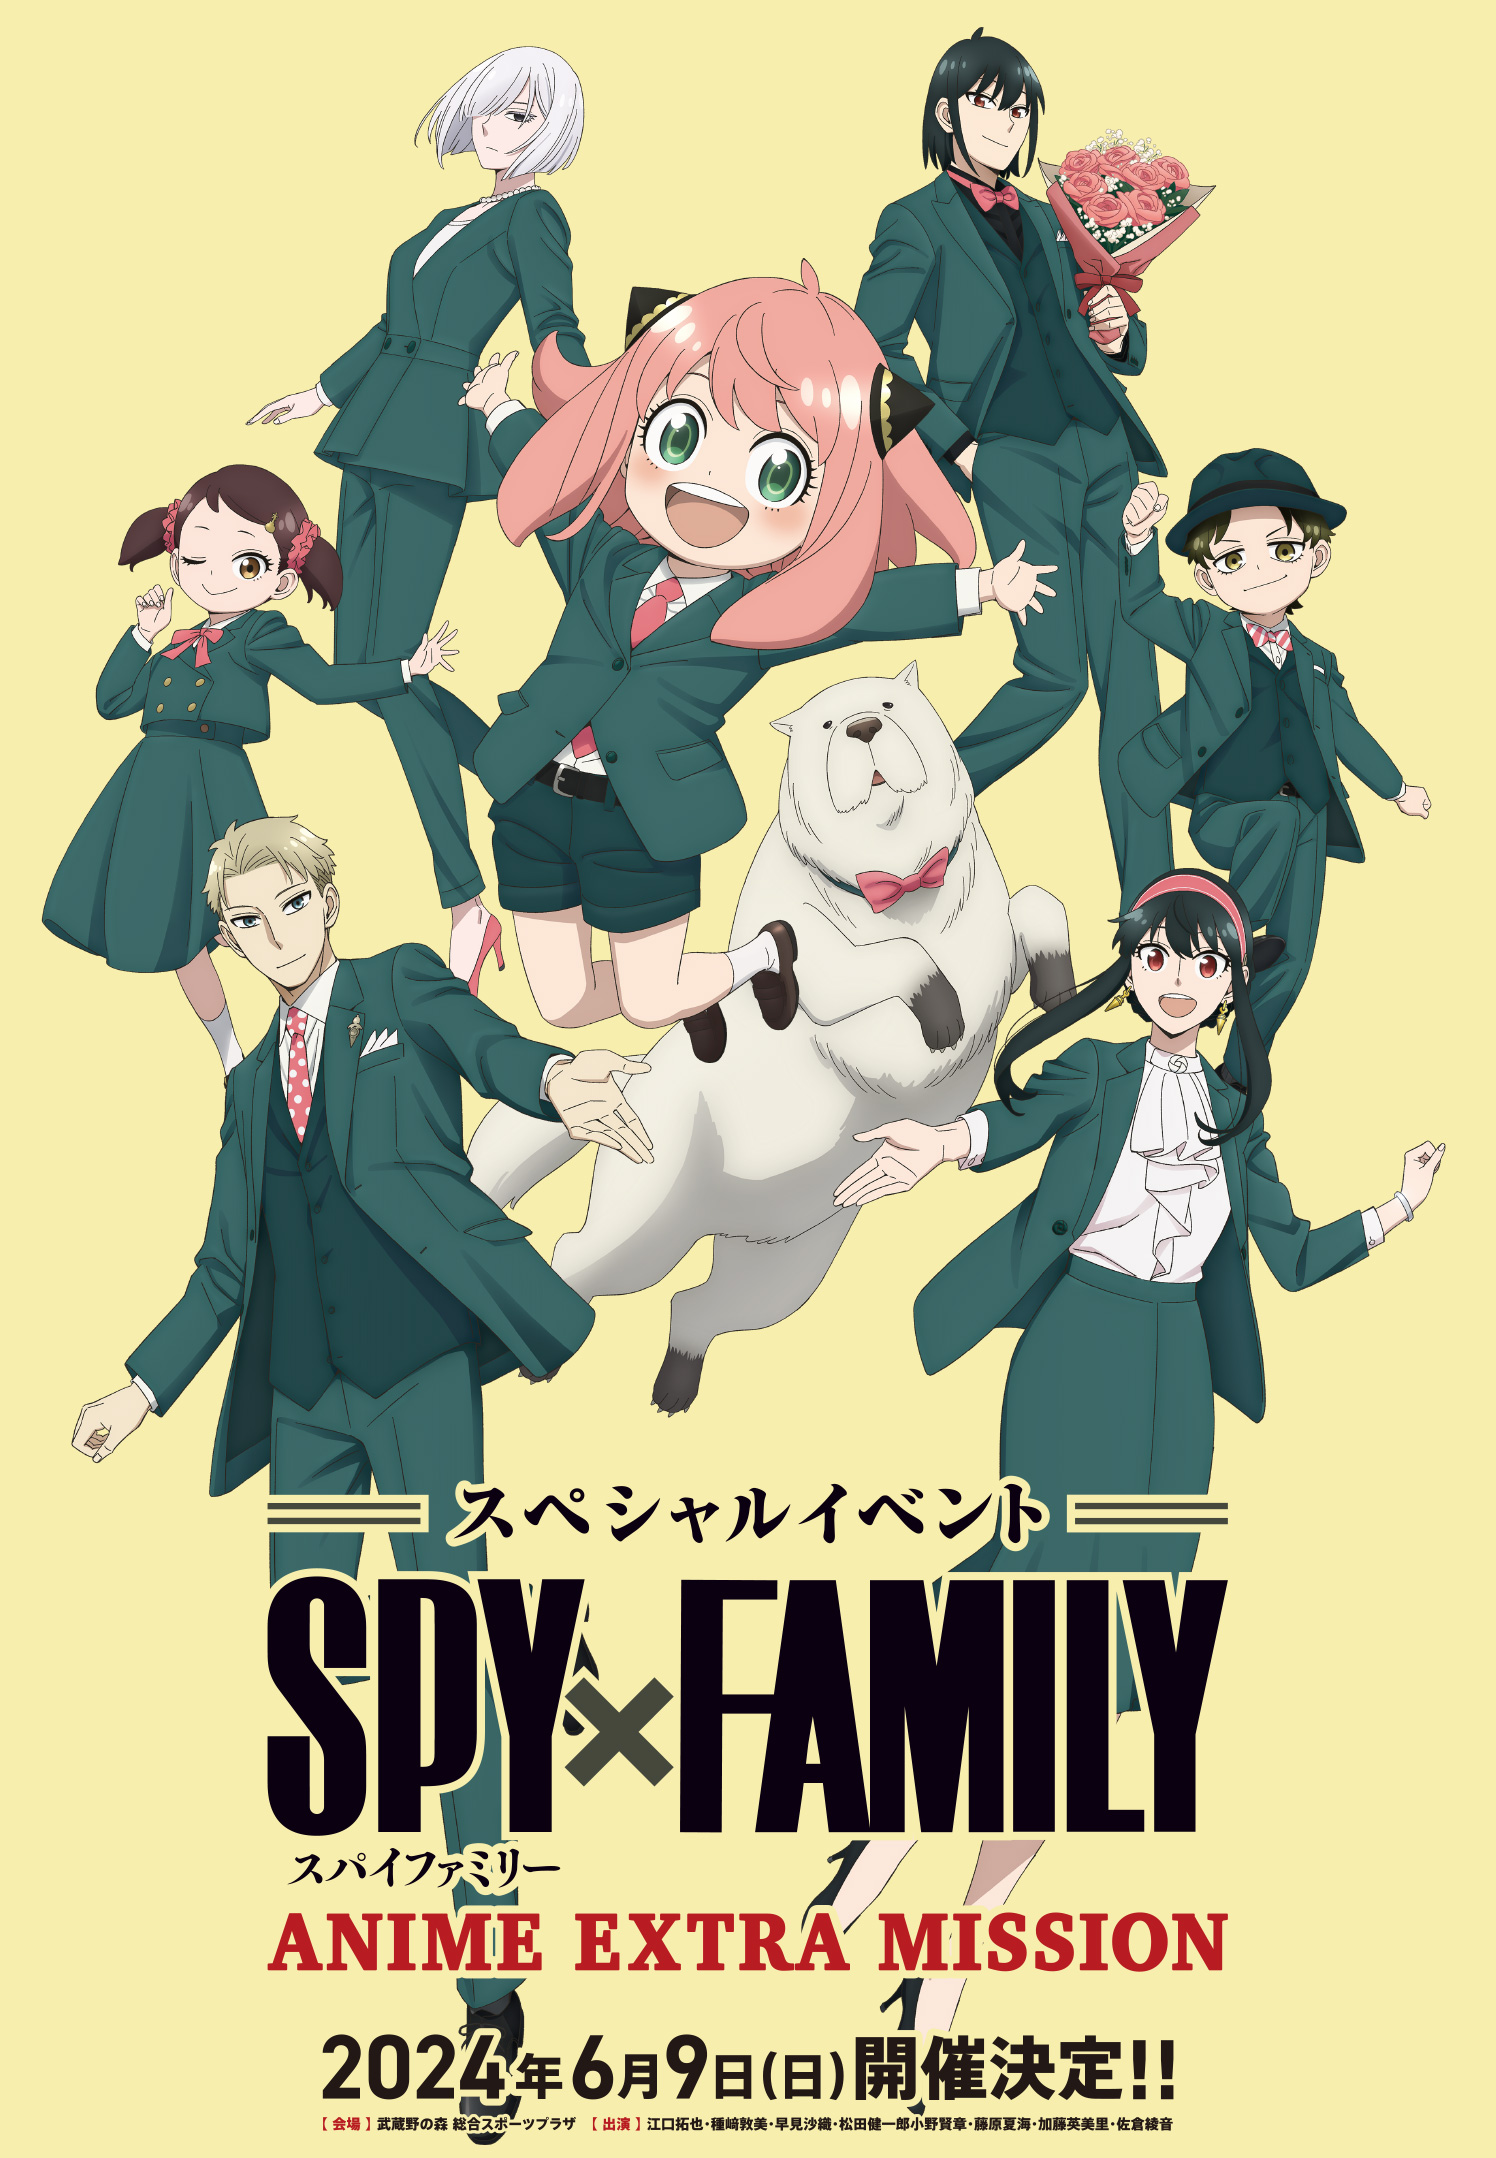 TVアニメ『SPY×FAMILY』SPECIAL EVENT